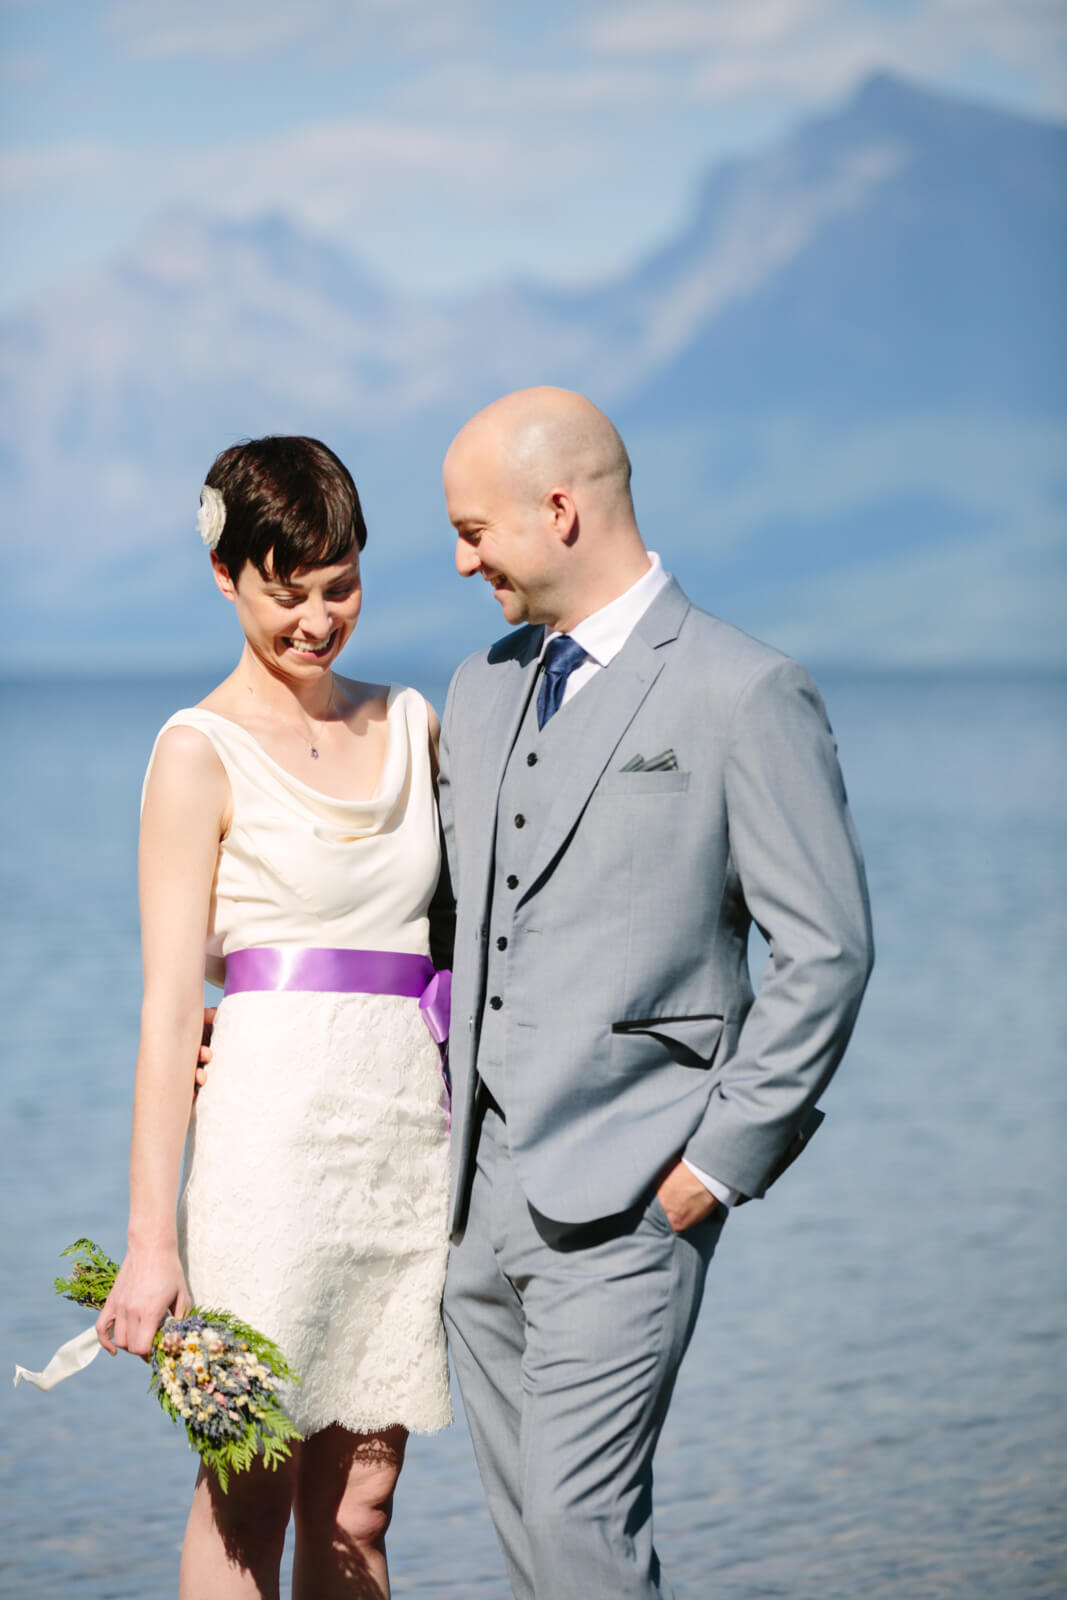 A bride and groom smile at one another at Lake McDonald at their Glacier National Park elopement